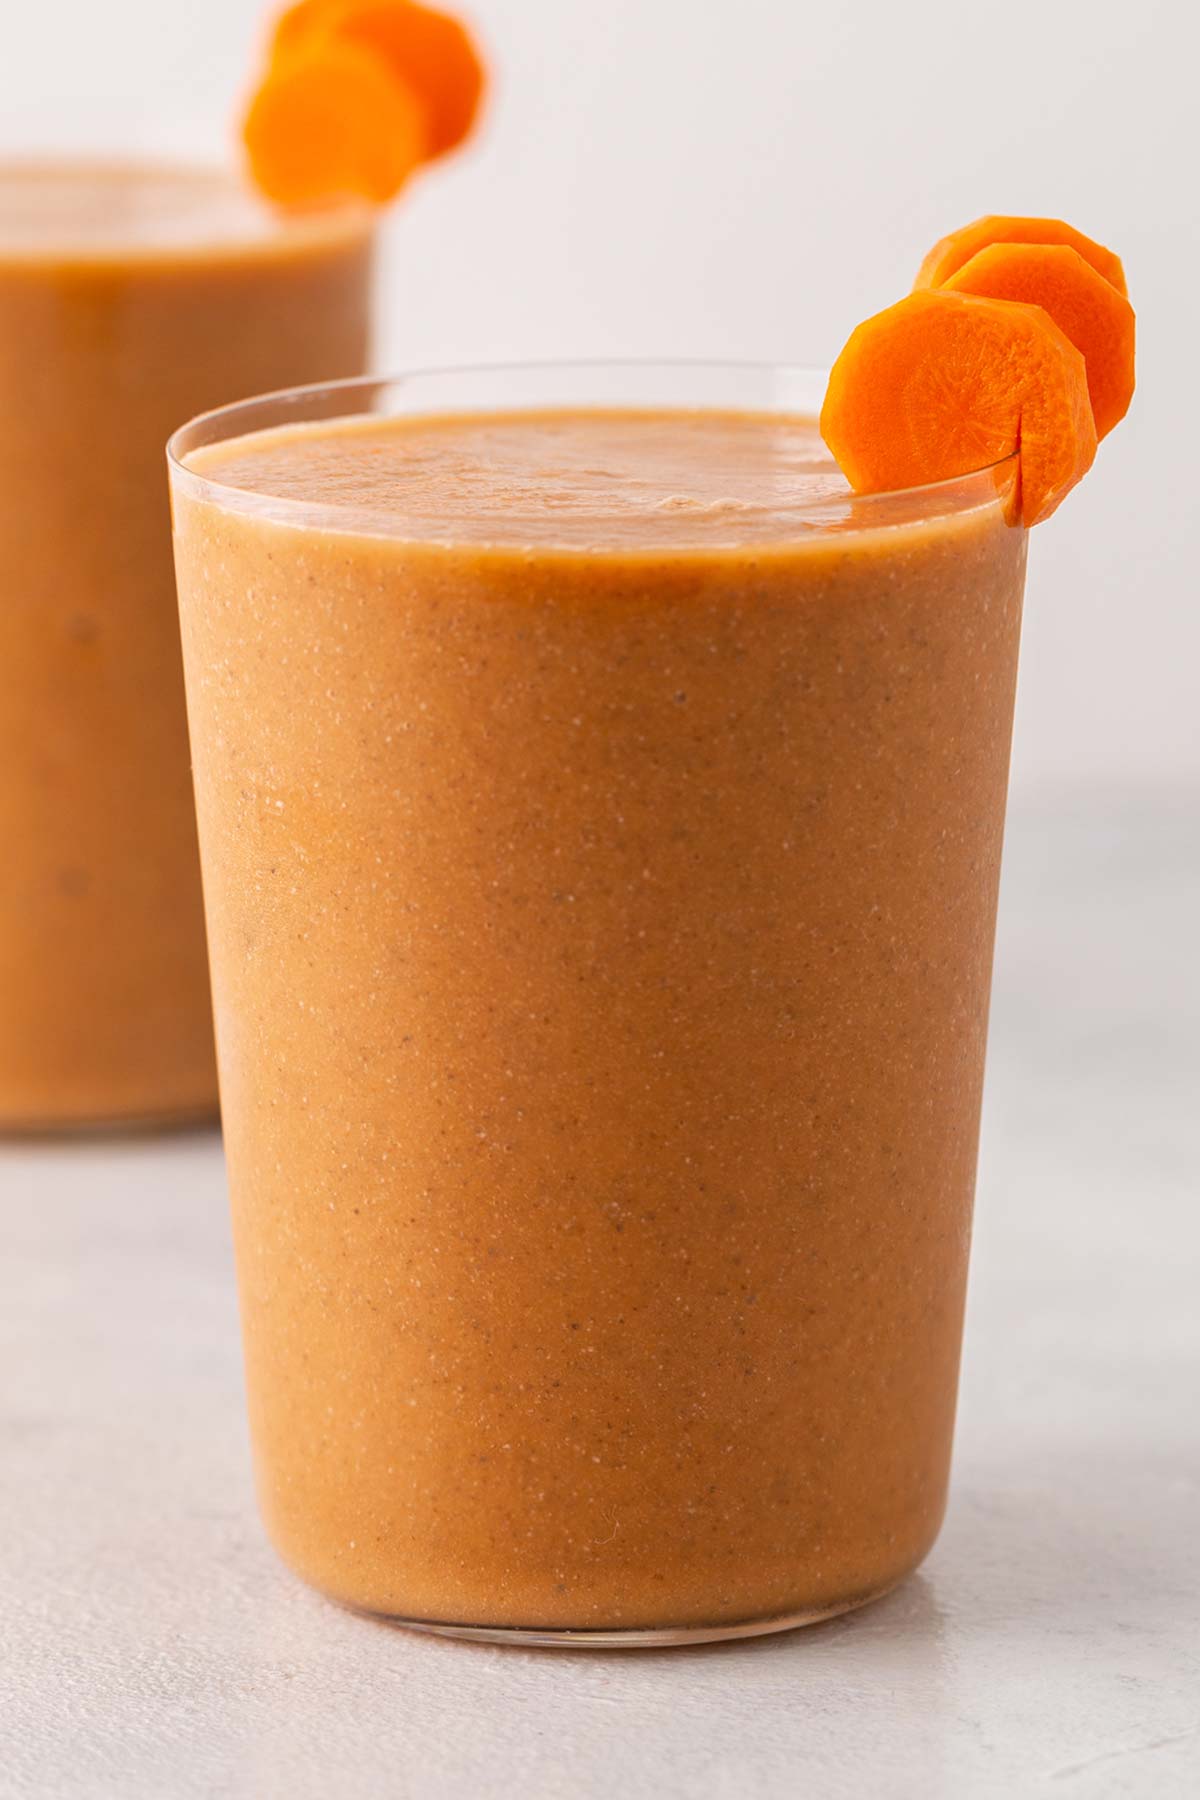 Carrot smoothie in a glass.